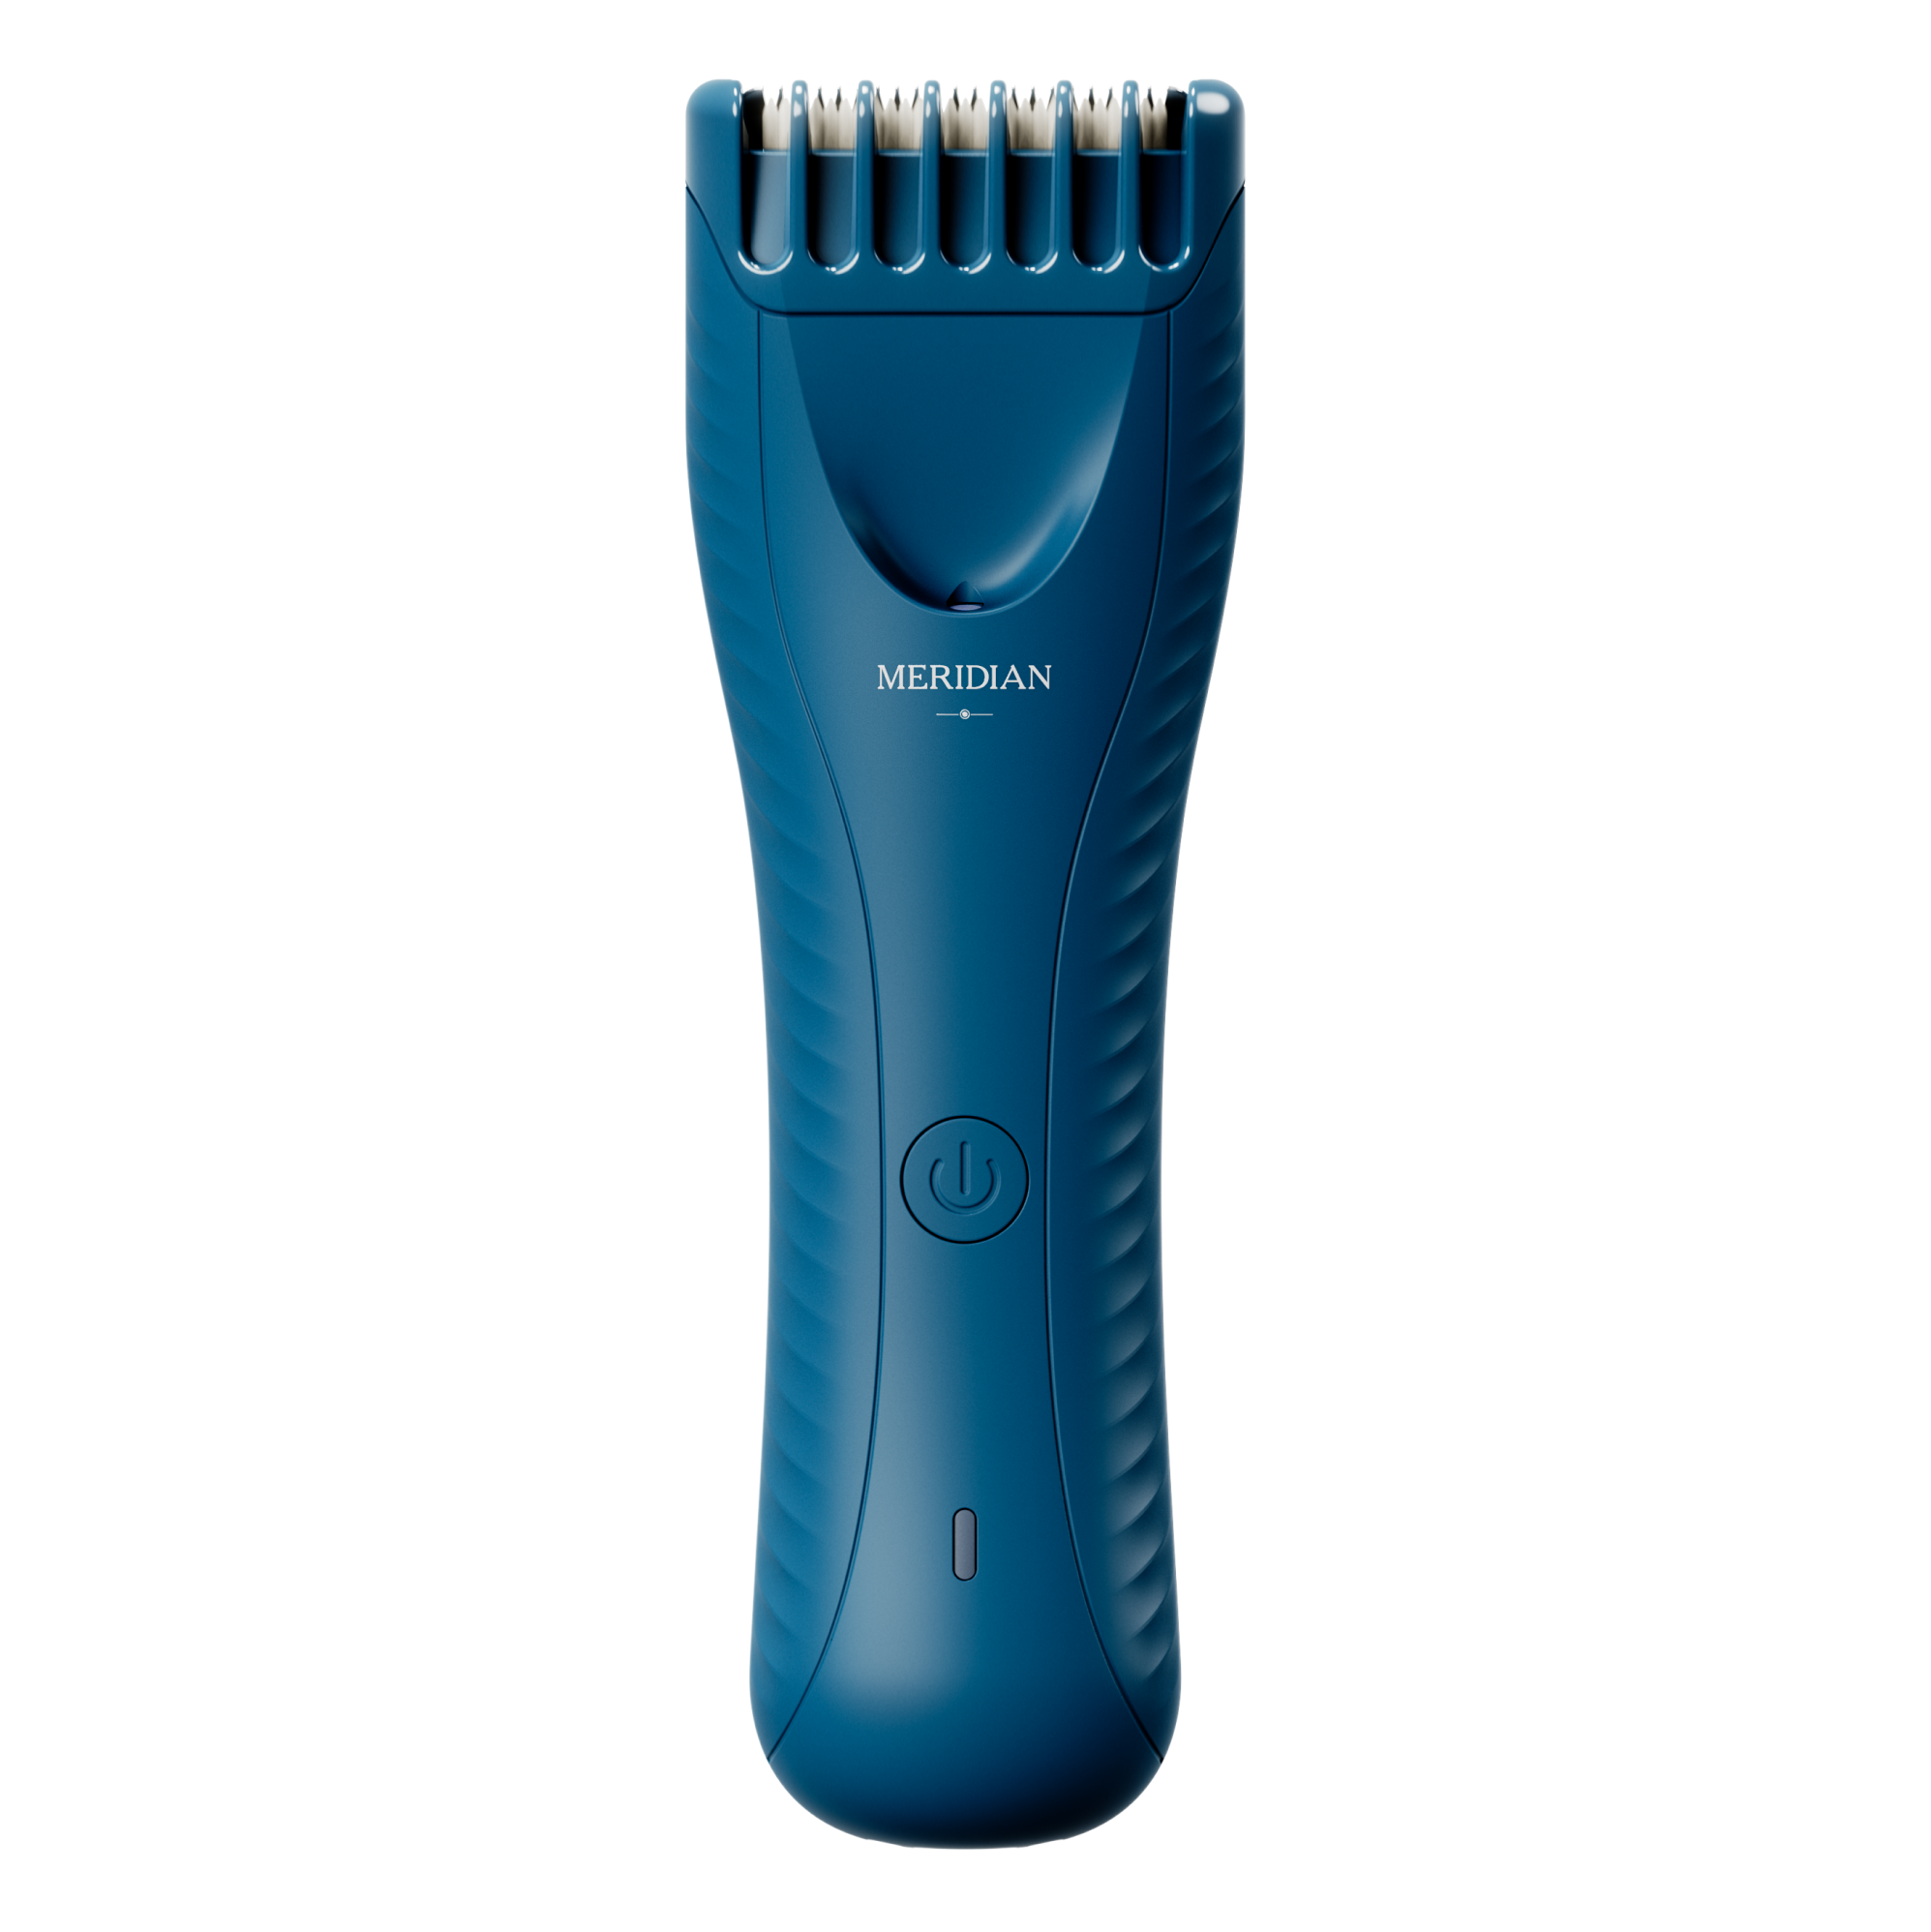 The Trimmer Plus